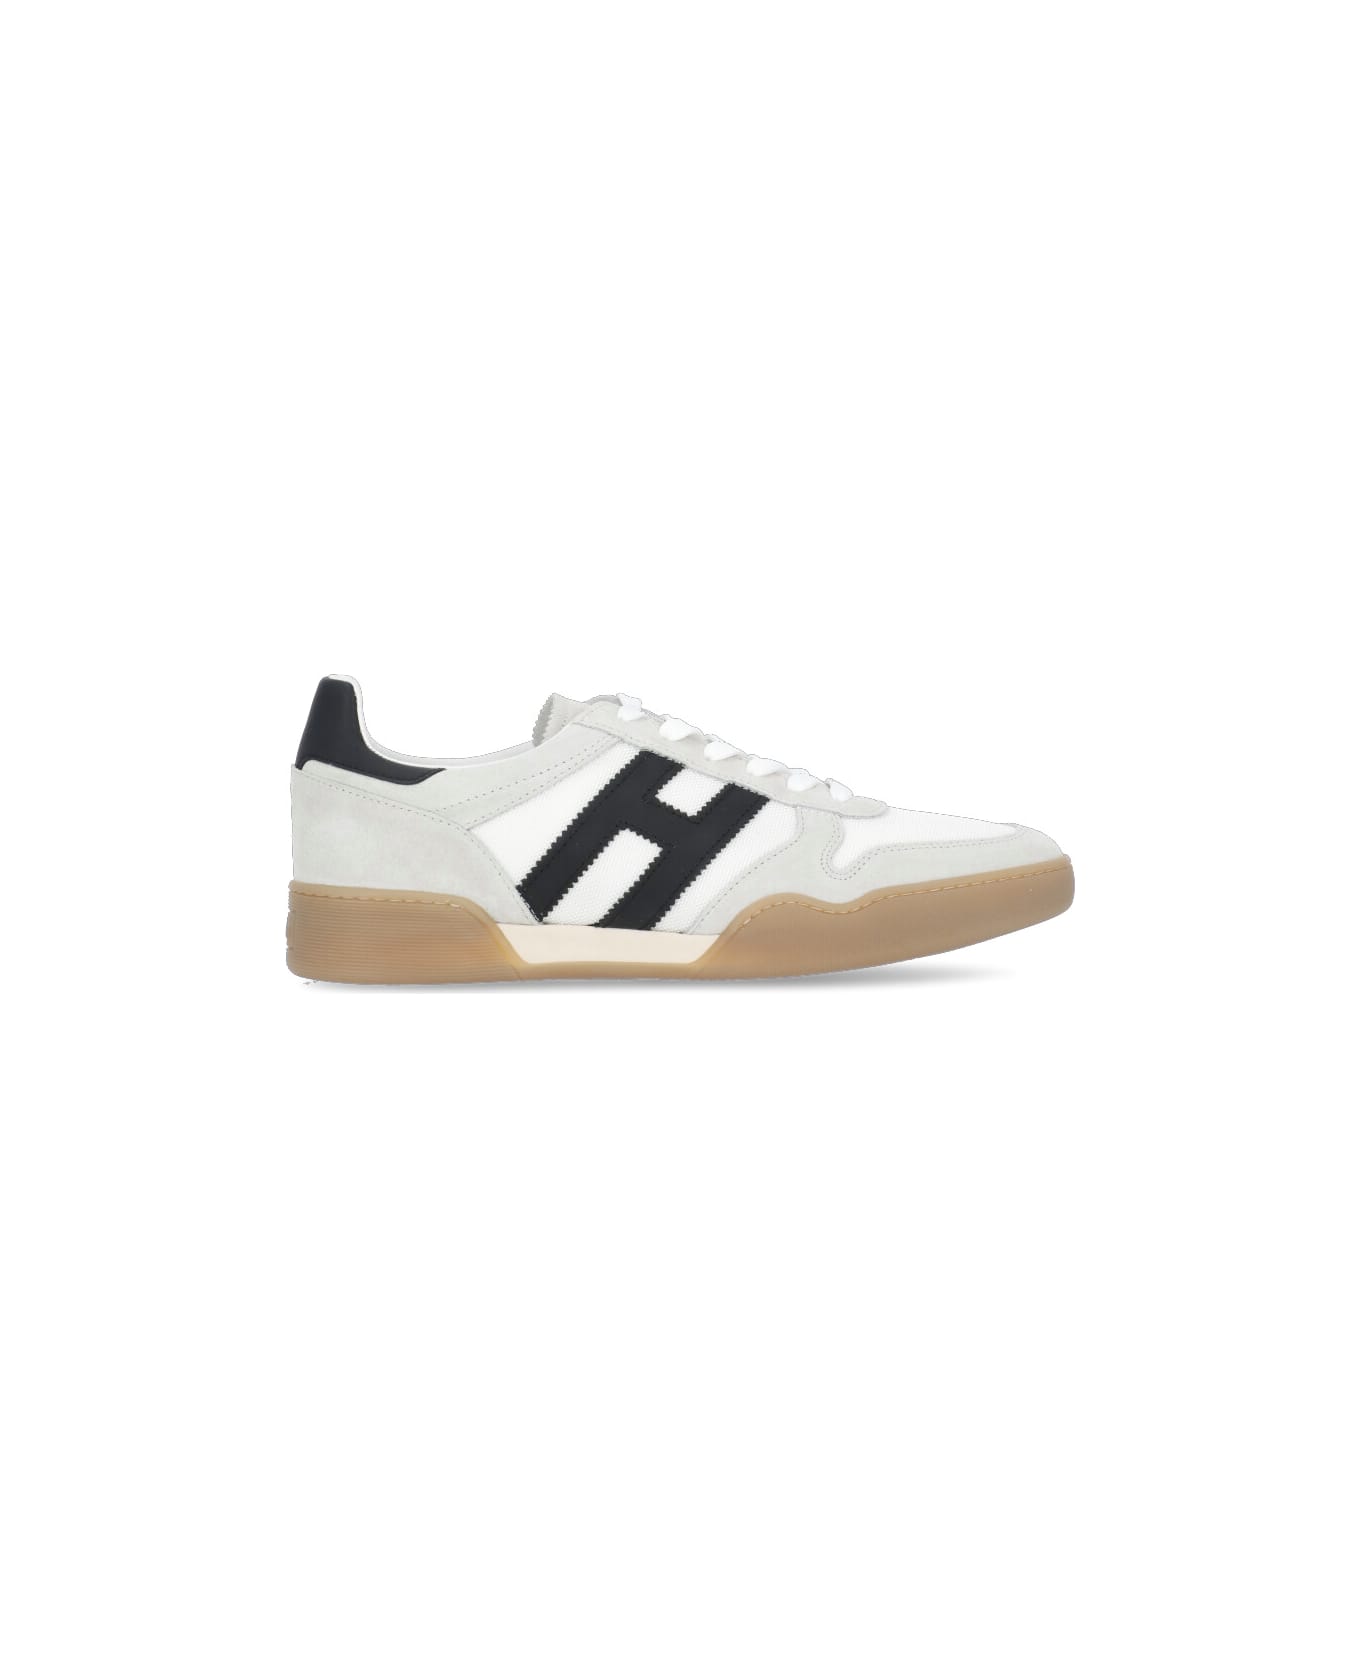 Hogan H357 Sneakers From - White スニーカー